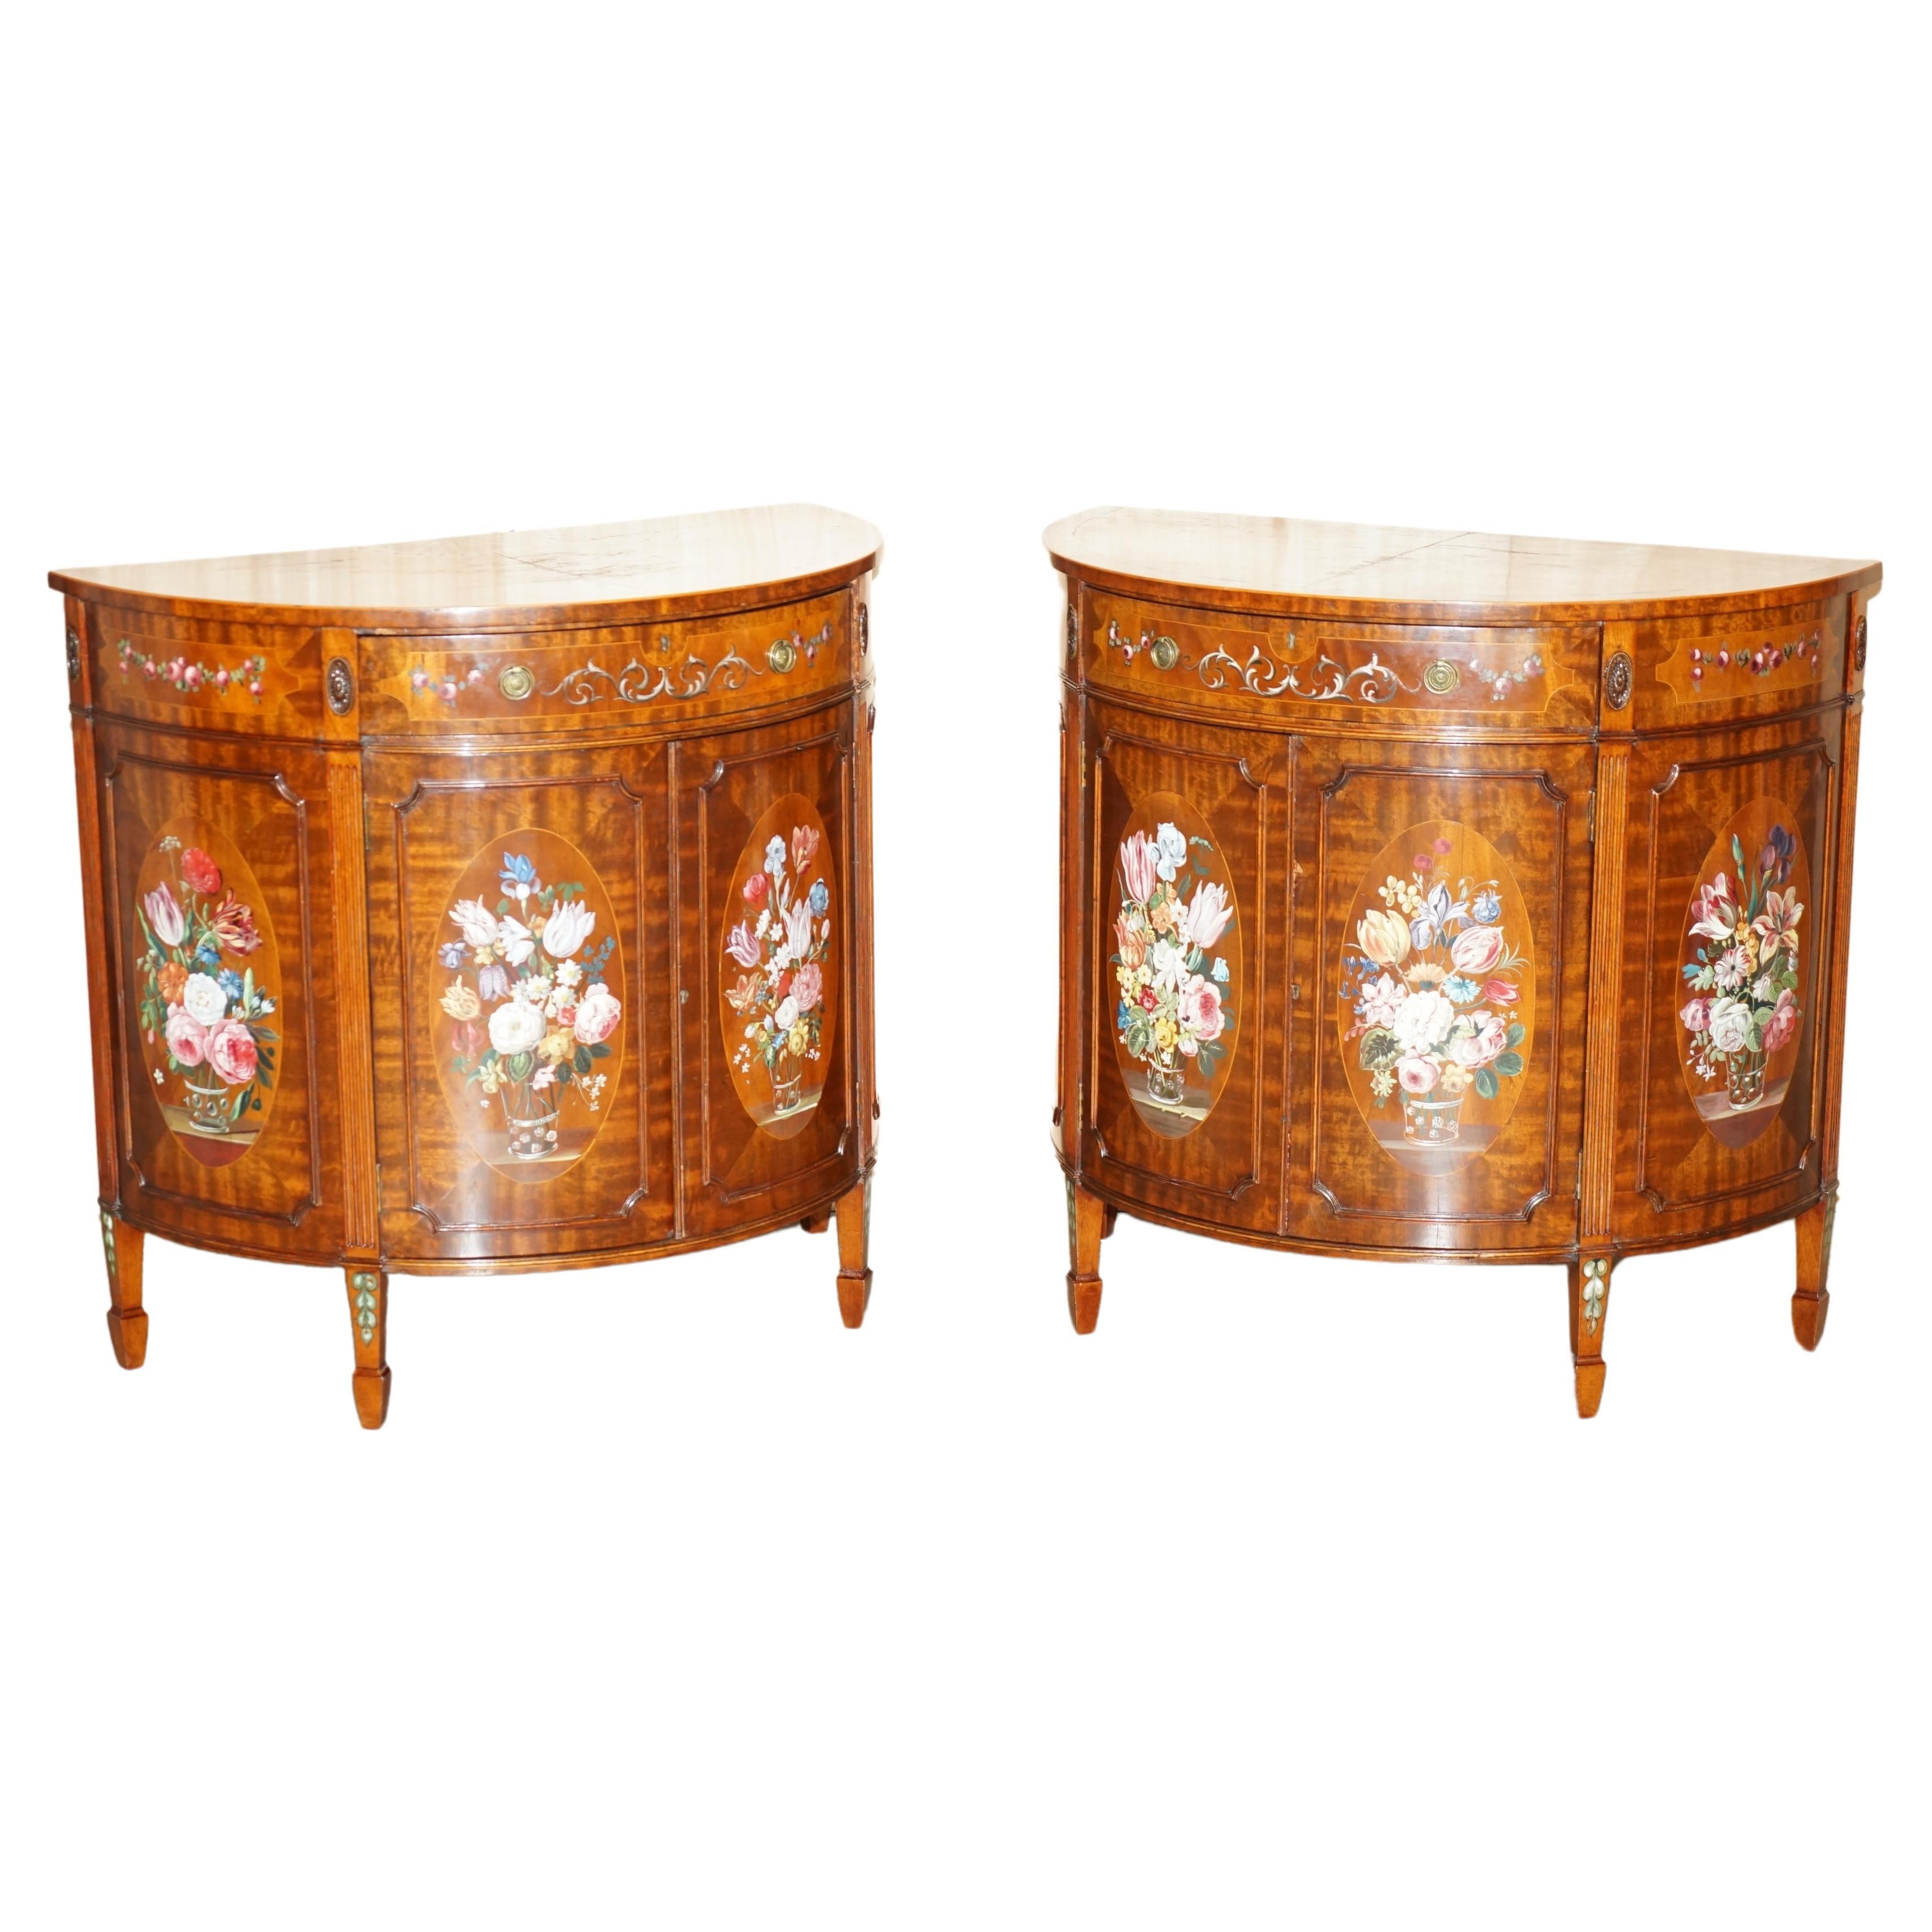 PAIR OF STUNNING ANTIQUE ADAMS SHERATON PAINTED DEMI LUNE SIDEBOARD CUPBOARDs